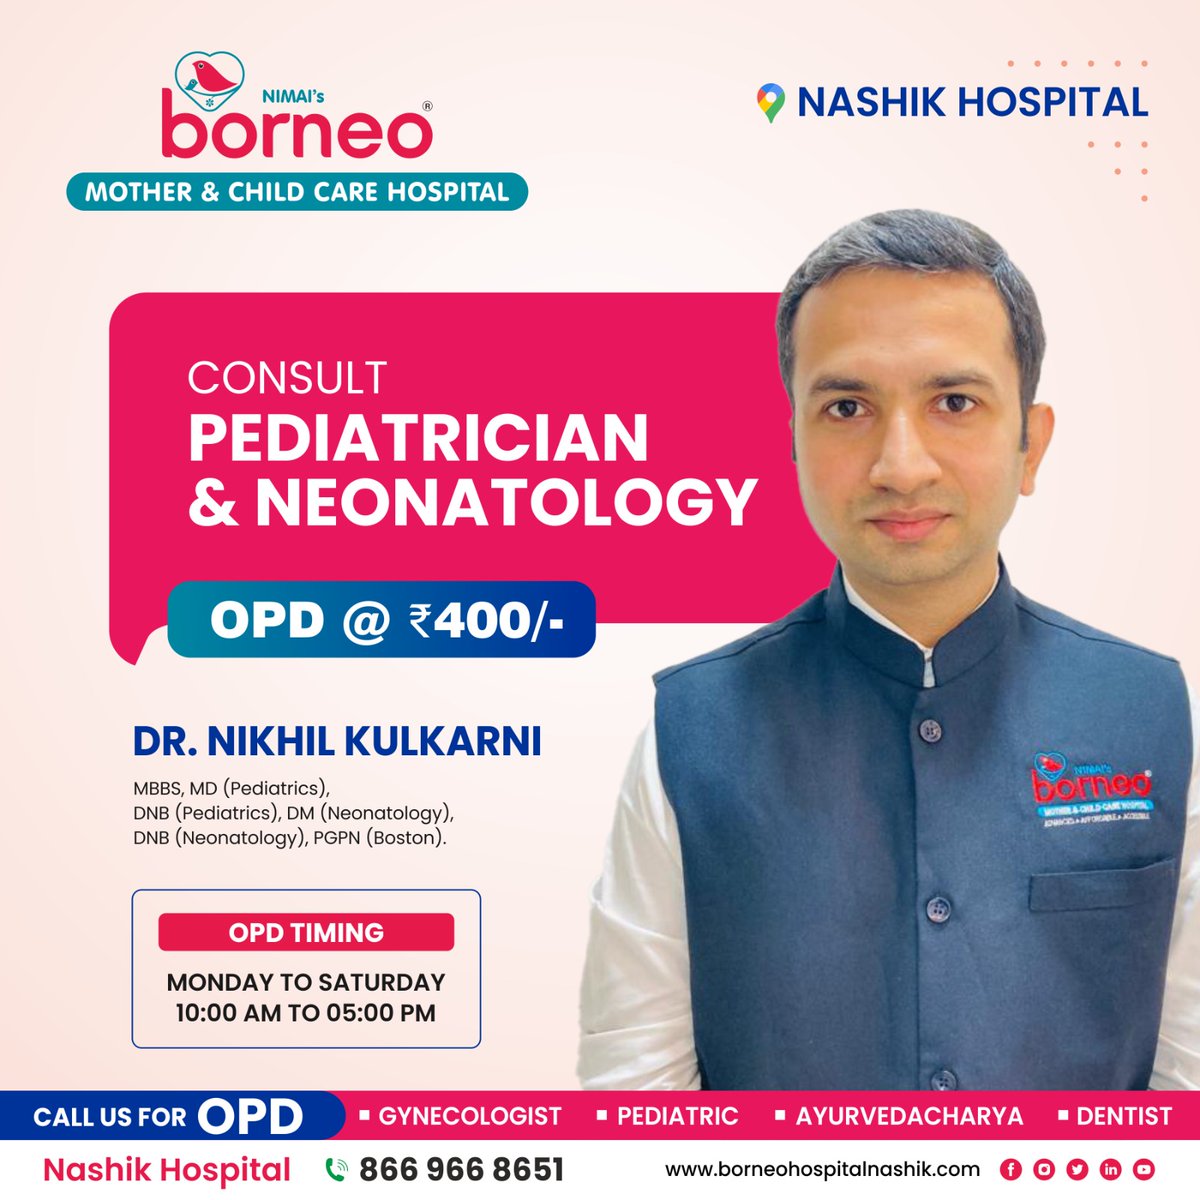 Borneo is India's fastest-growing Mother And Child Hospital, known for its devoted patient care, luxurious infrastructure and advanced technology

DR. NIKHIL KULKARNI
MBBS, MD (Pediatrics), DNB (Pediatrics), DM (Neonatology). DNB (Neonatology), POPN (Boston)

 Call on:8669668651